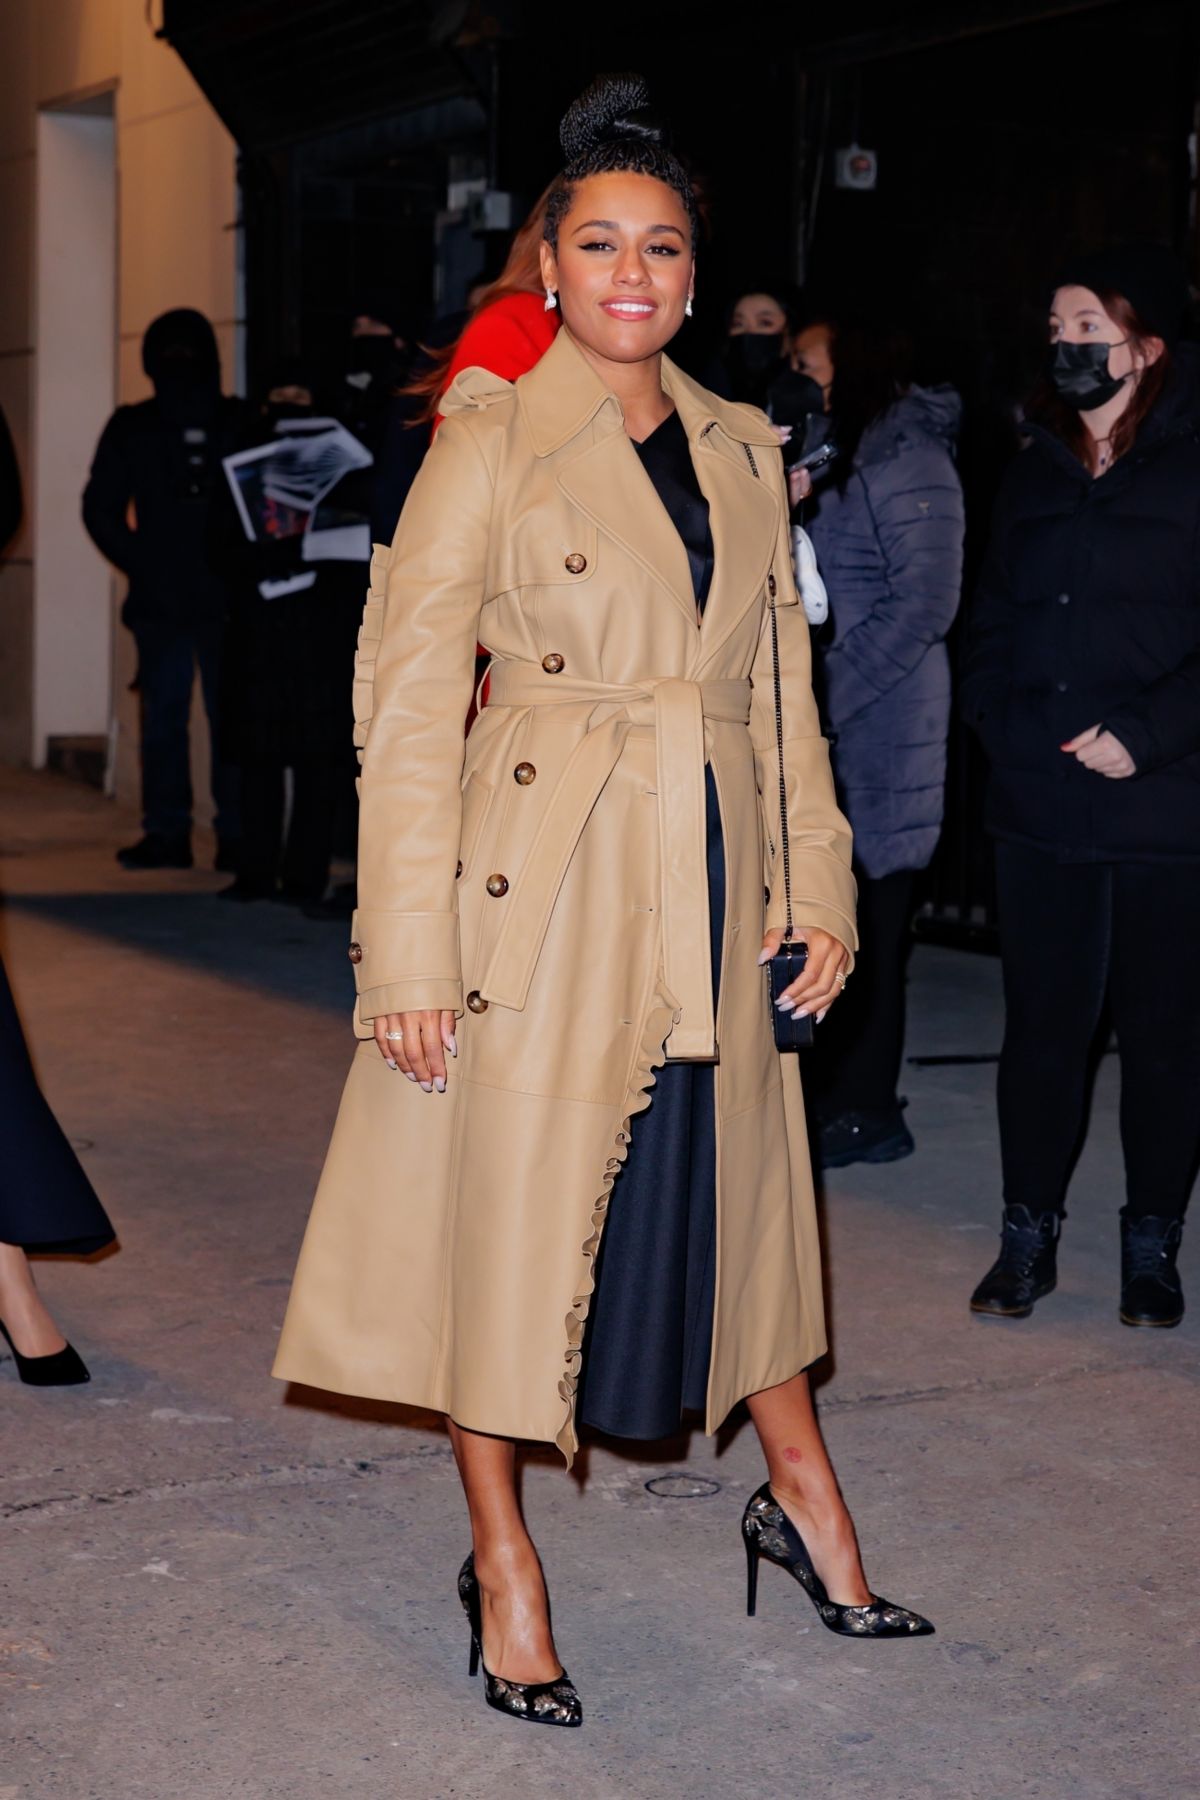 ARIANA DEBOSE Arrives at Michael Kors Show at NYFW in New York 02/15 ...